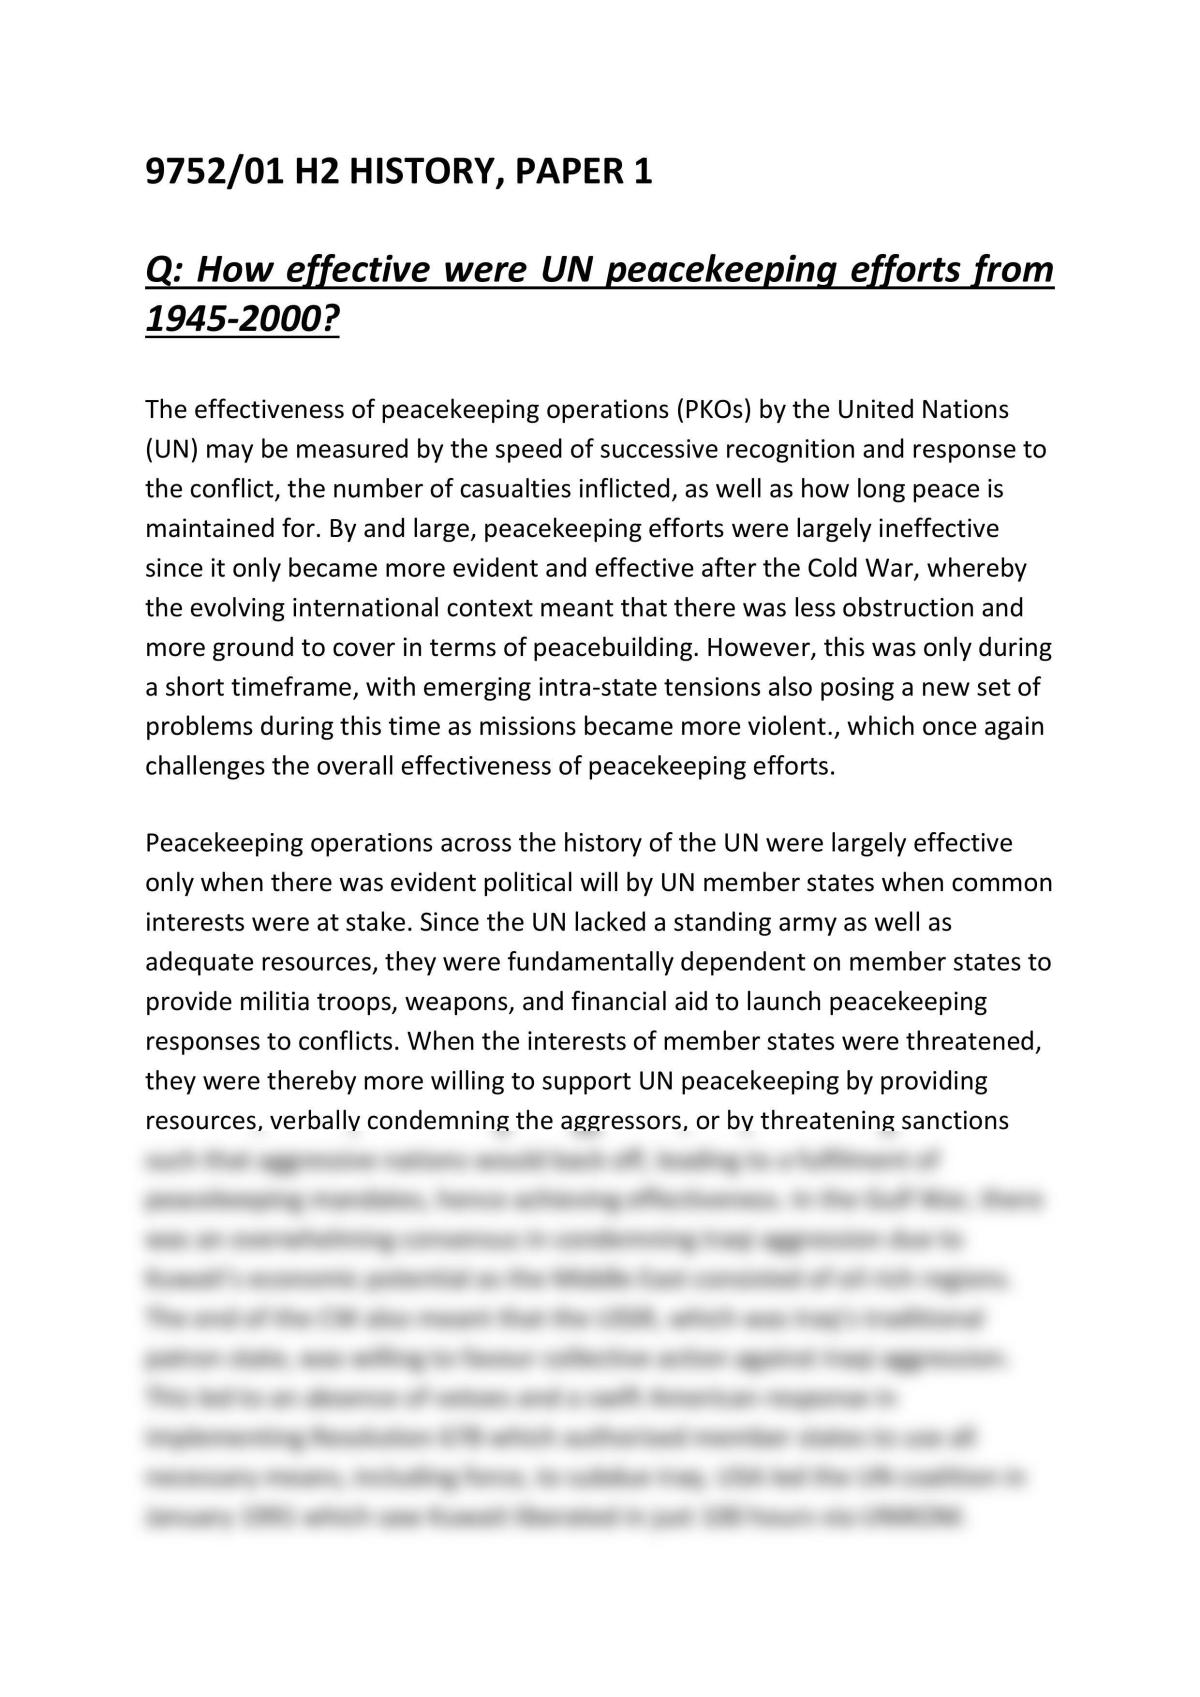 How effective were UN peacekeeping efforts from 1945-2000? - Page 1